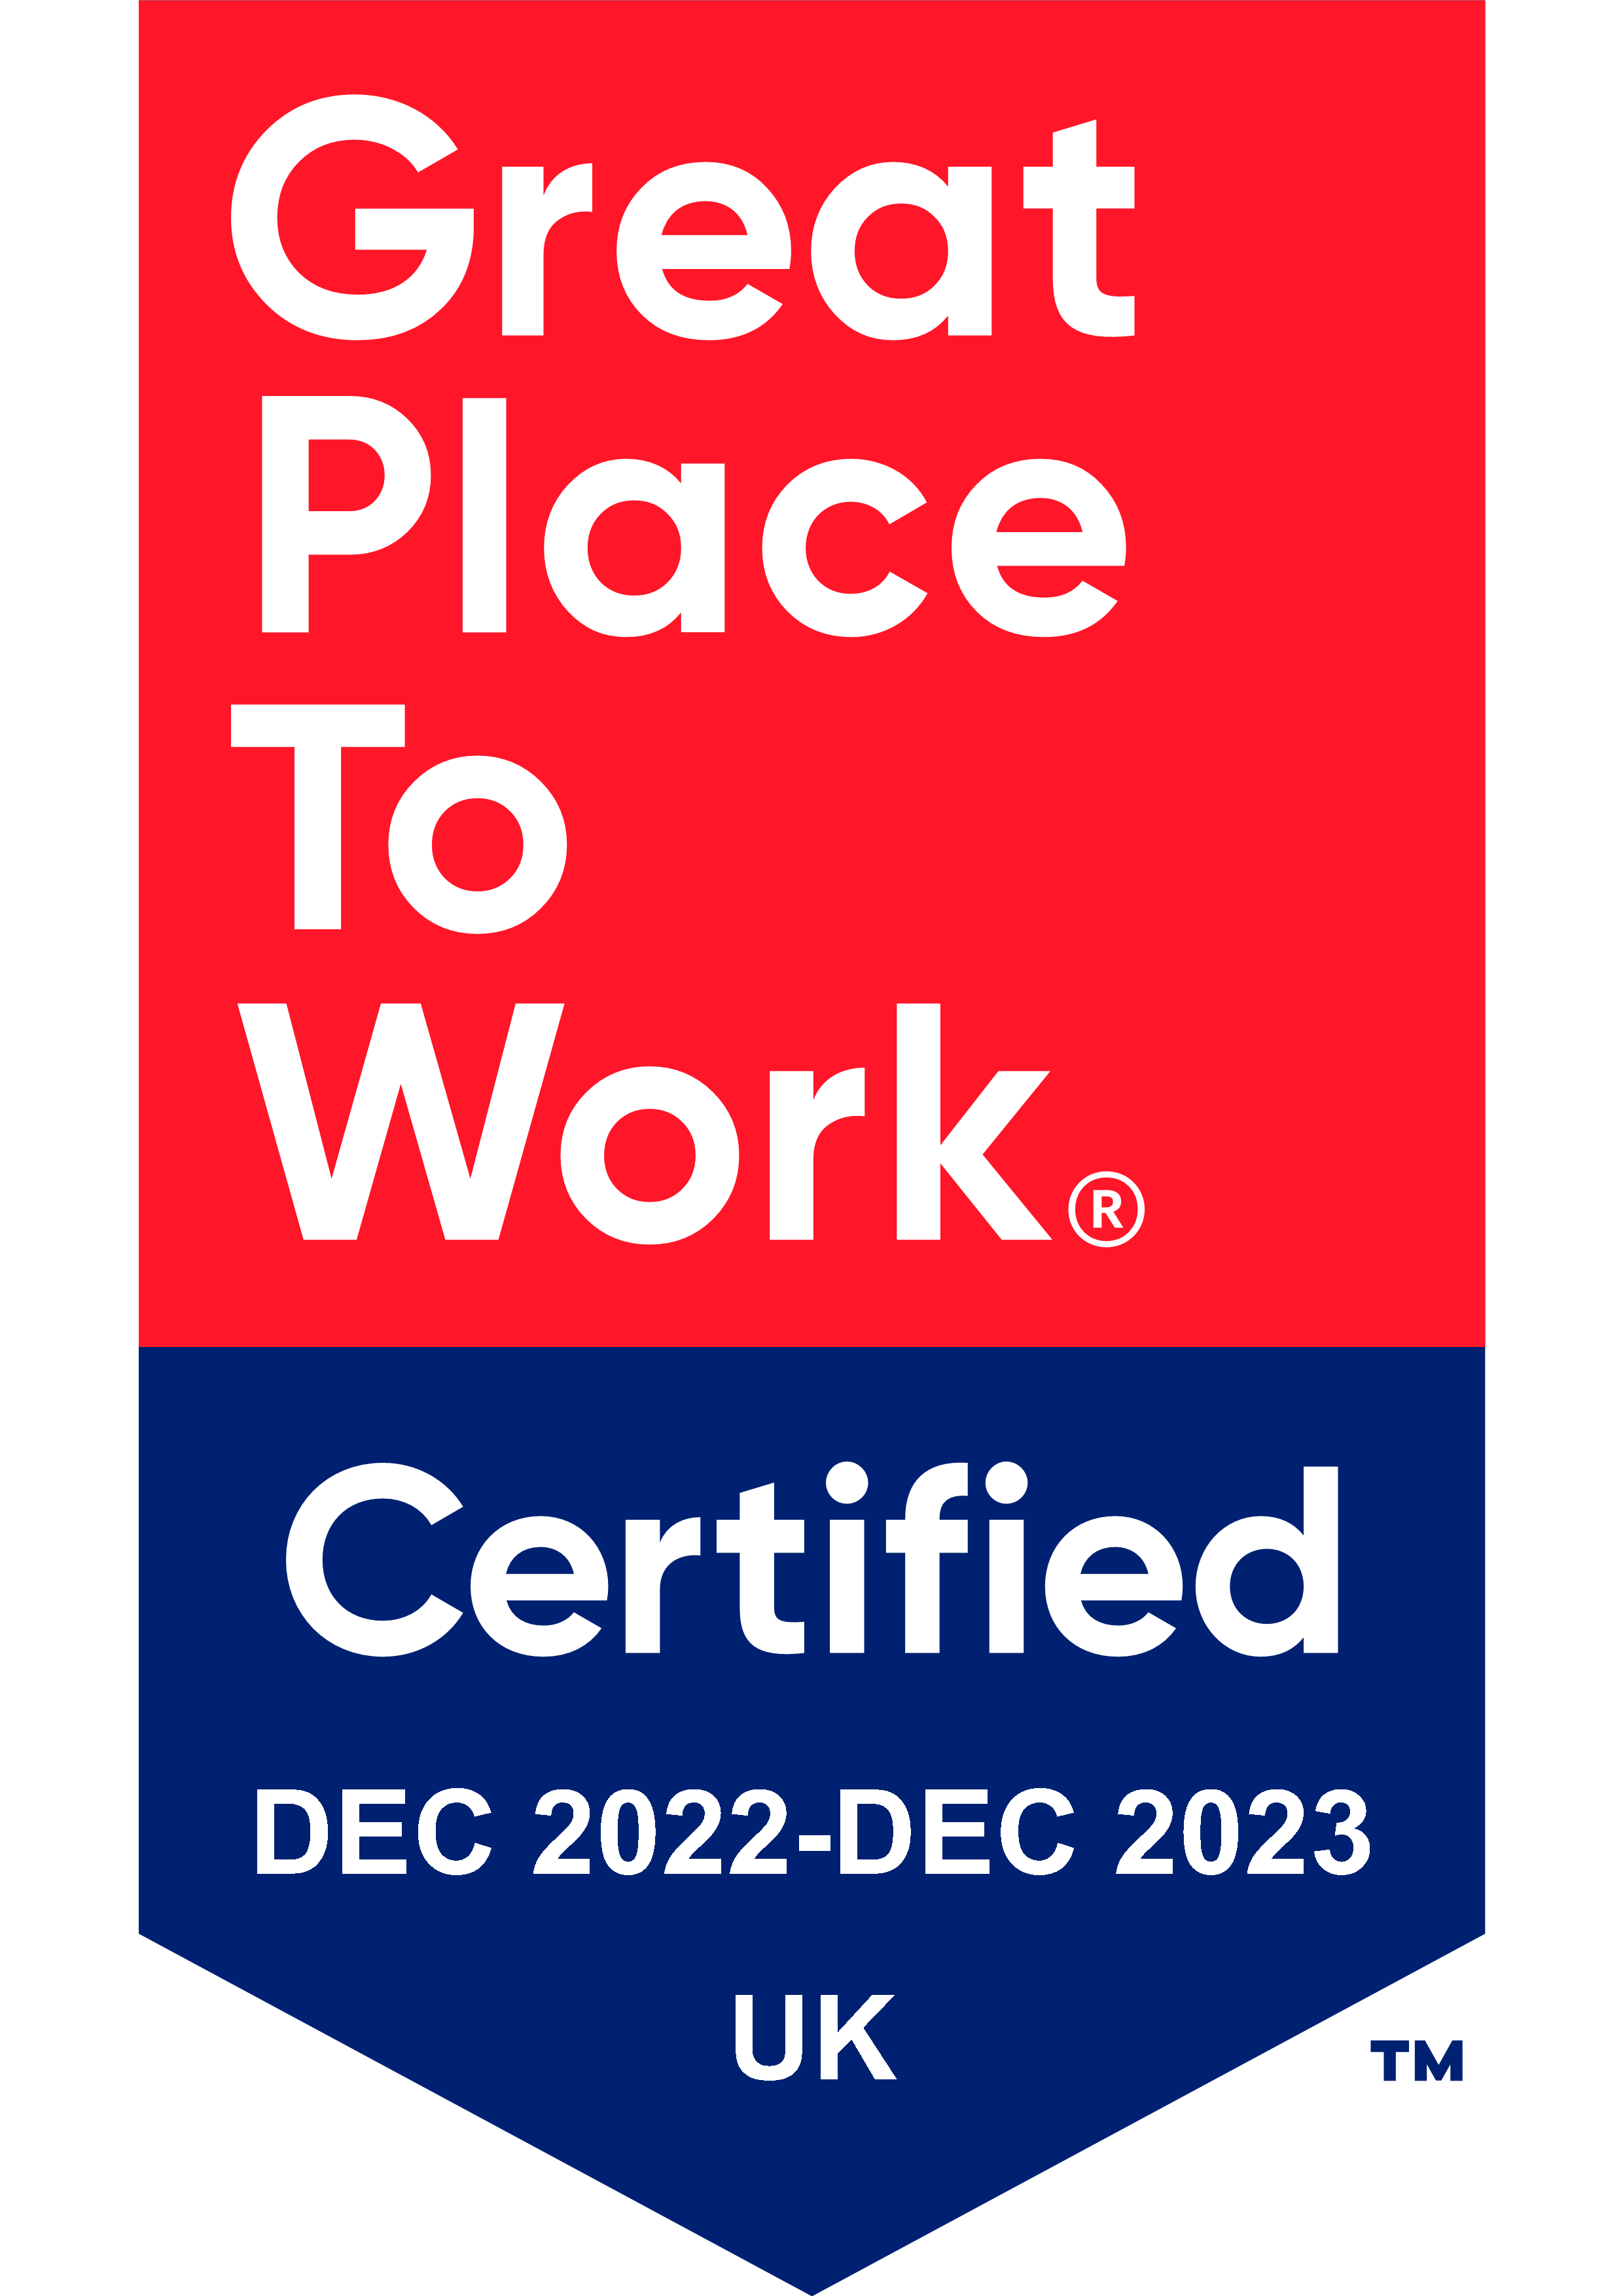 Great Place to Work logo with red and blue background colouring with white writing